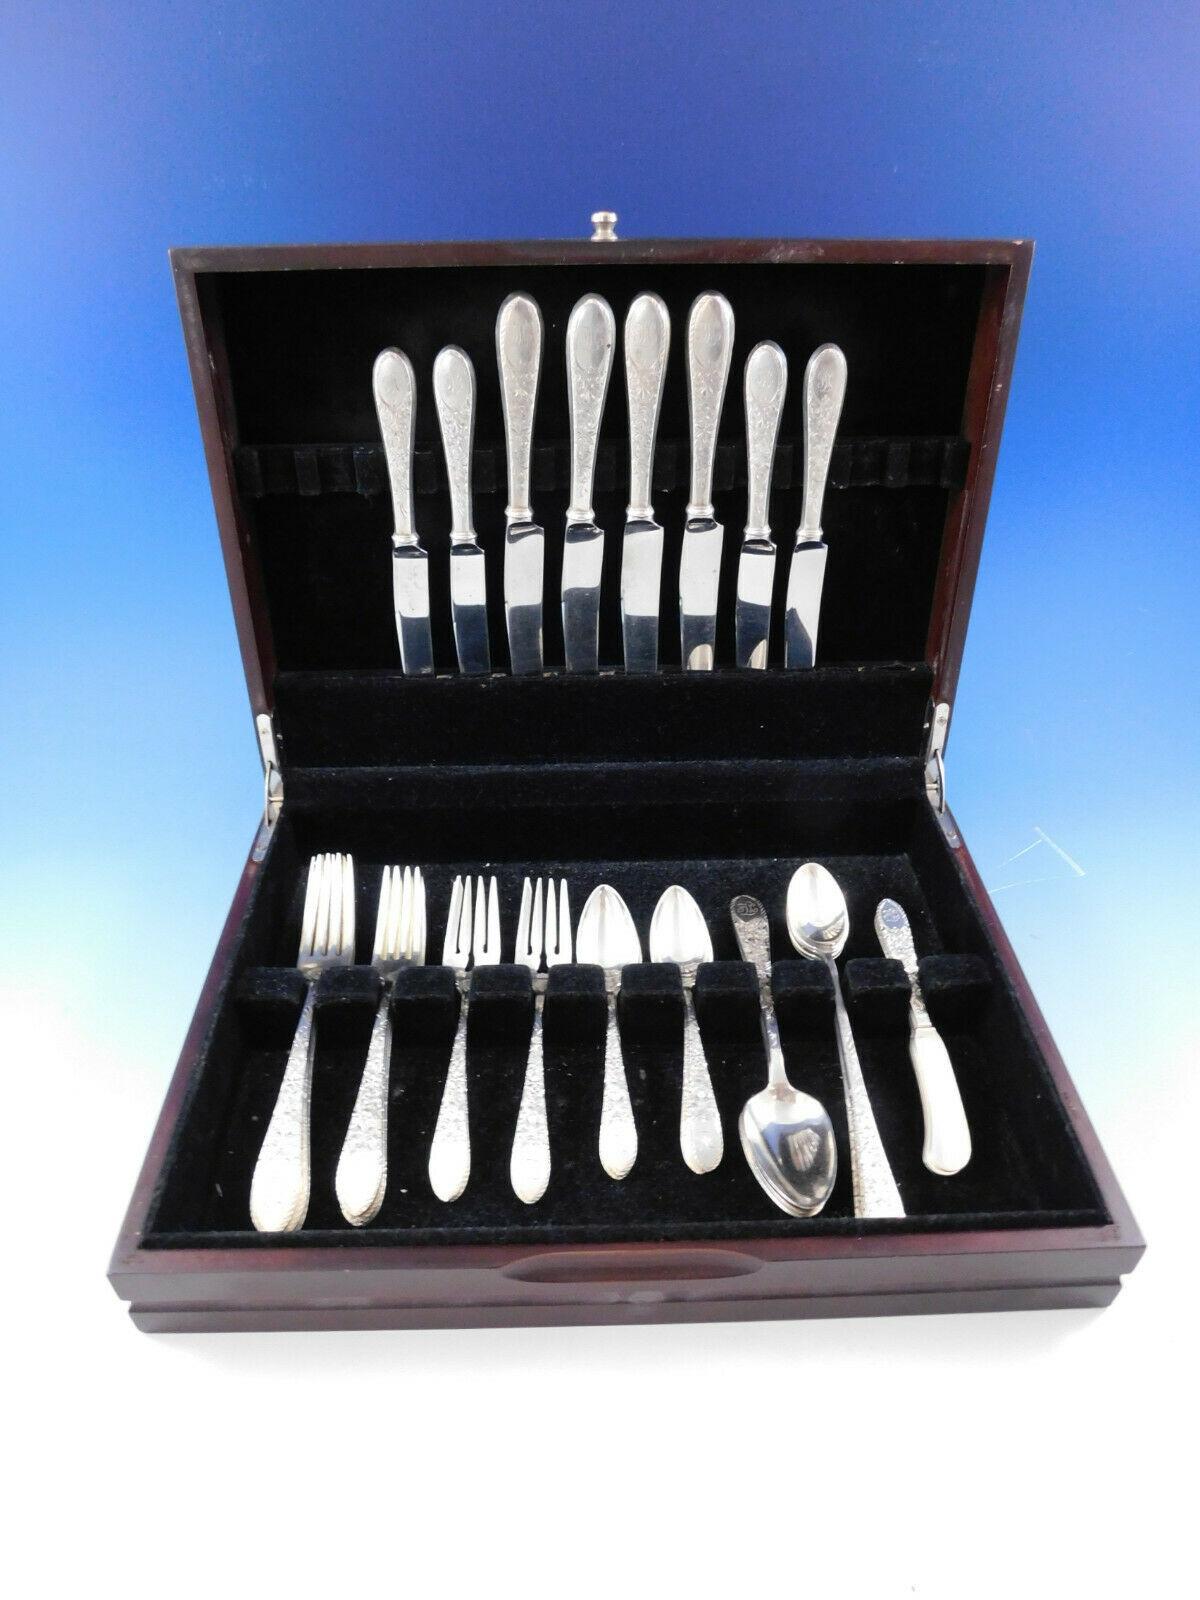 Scarce elmwood by Gorham sterling silver Flatware set introduced in the year 1894, with engraved design - 36 pieces. This set includes:

4 dinner size knives, 9 1/2